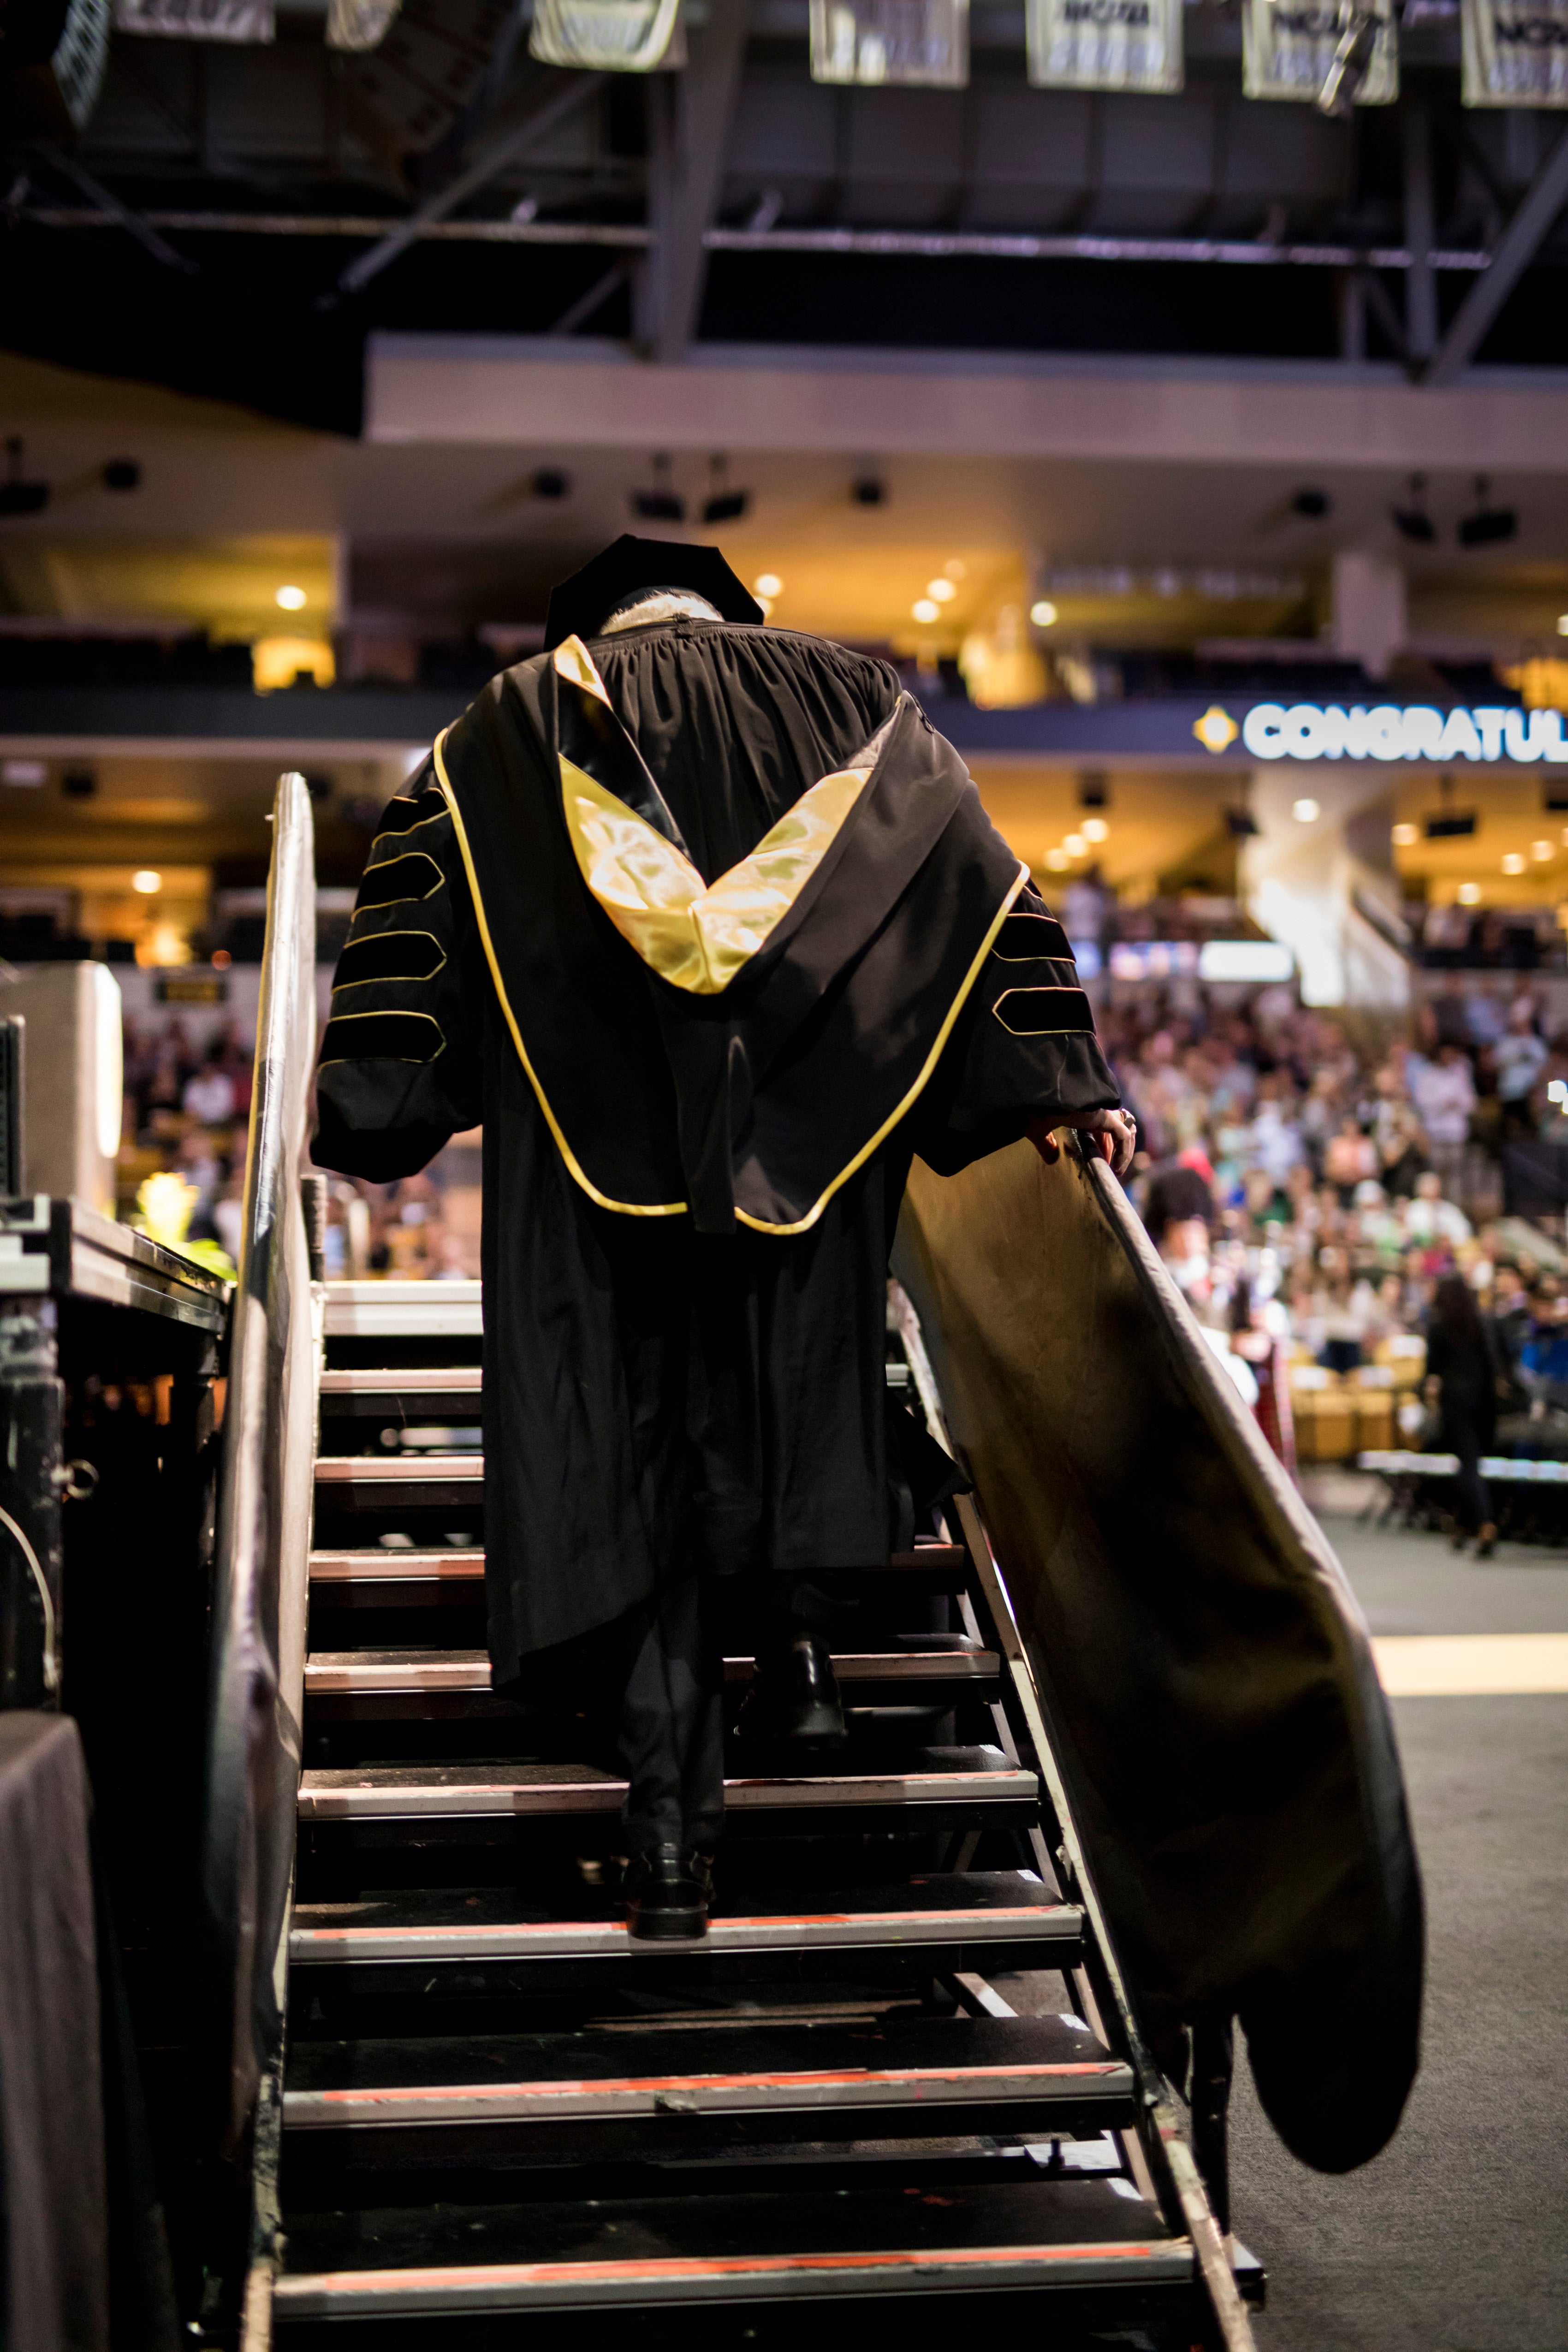 The back of John C. Hitt’s gown displays black and gold as he walks up the steps to the CFE Arena stage.